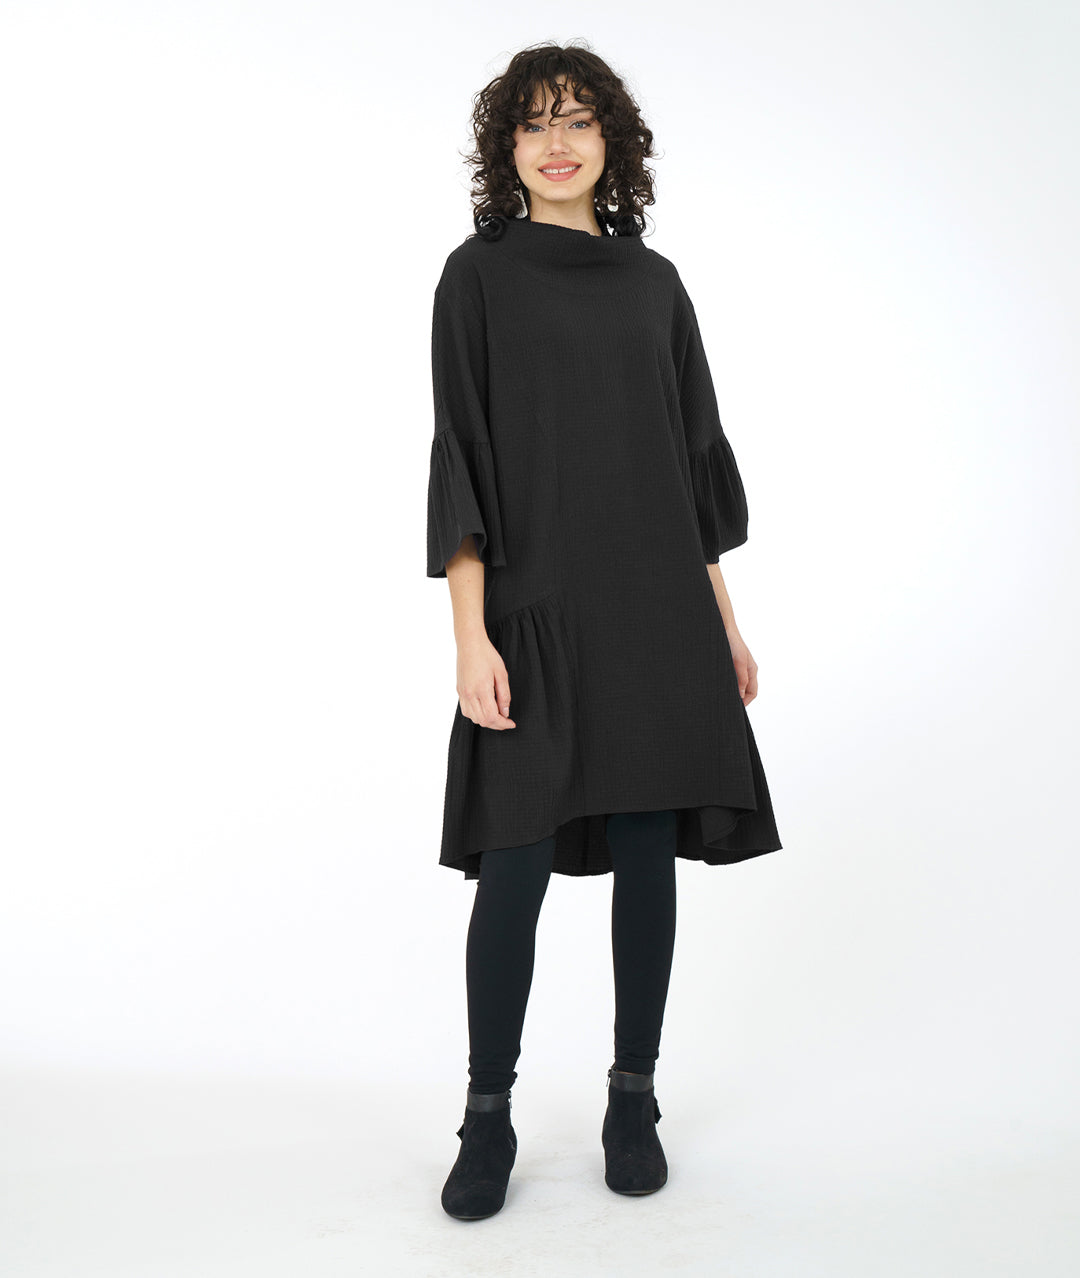 model in a black boxy dress with a cowl neck and a long ruffle at the skirt and sleeves